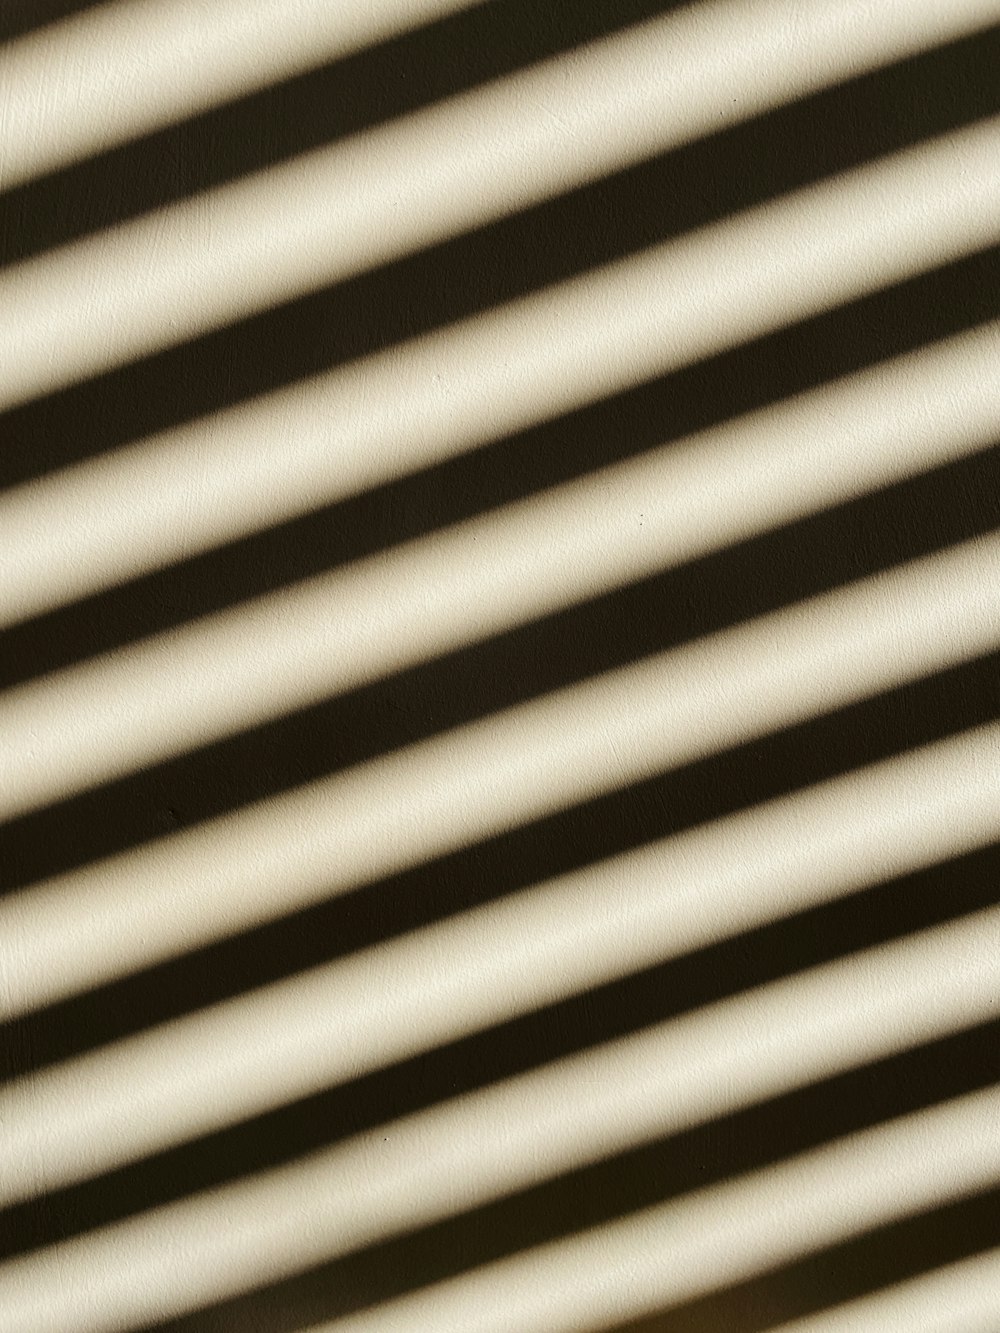 a close up of a black and white striped blind